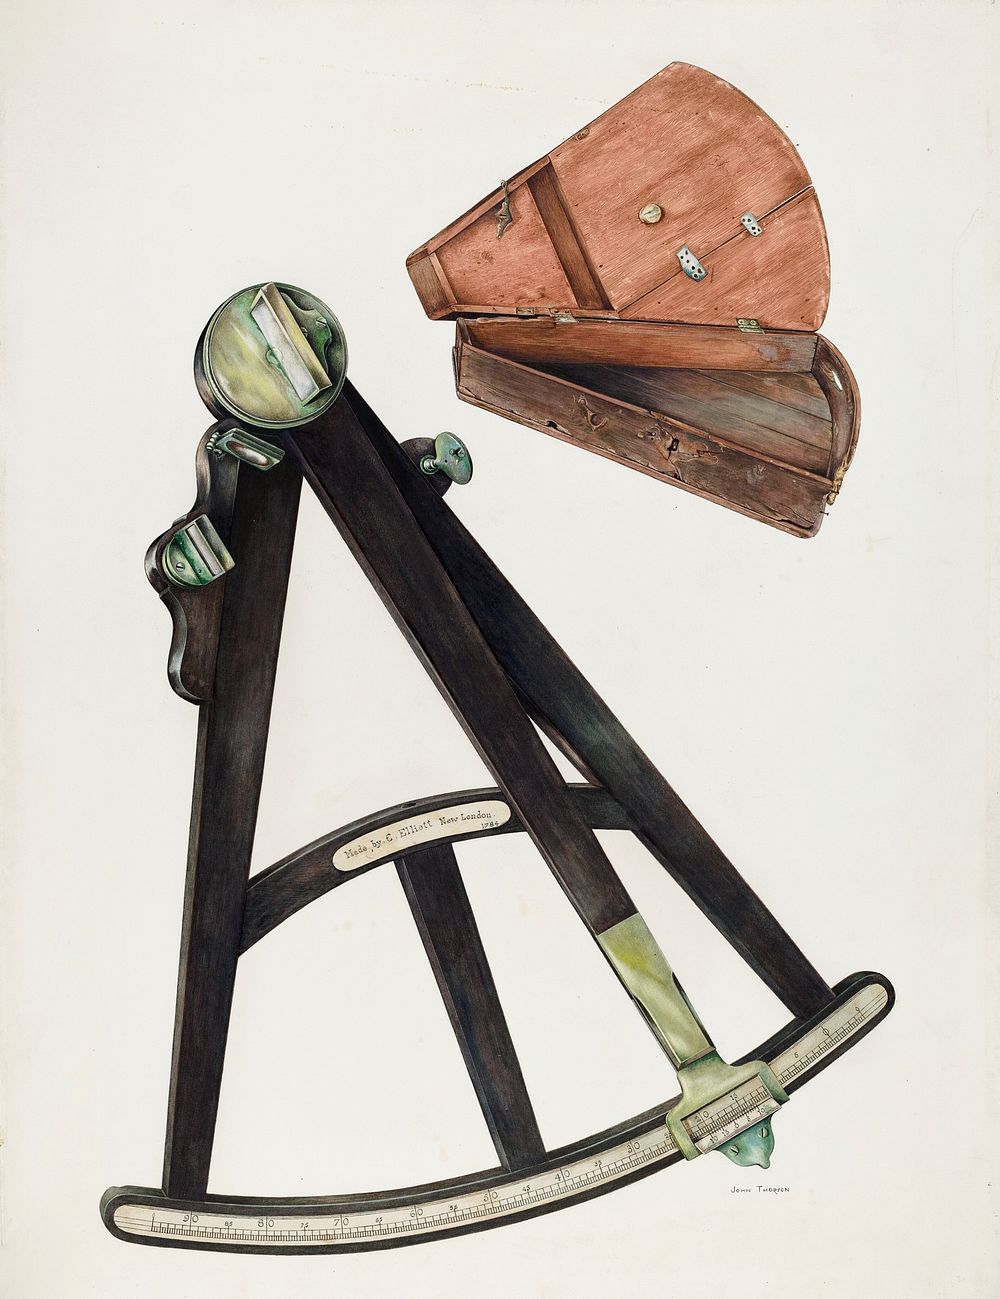 Octant (1939) by John Thorsen. Original from The National Gallery of Art. Digitally enhanced by rawpixel.